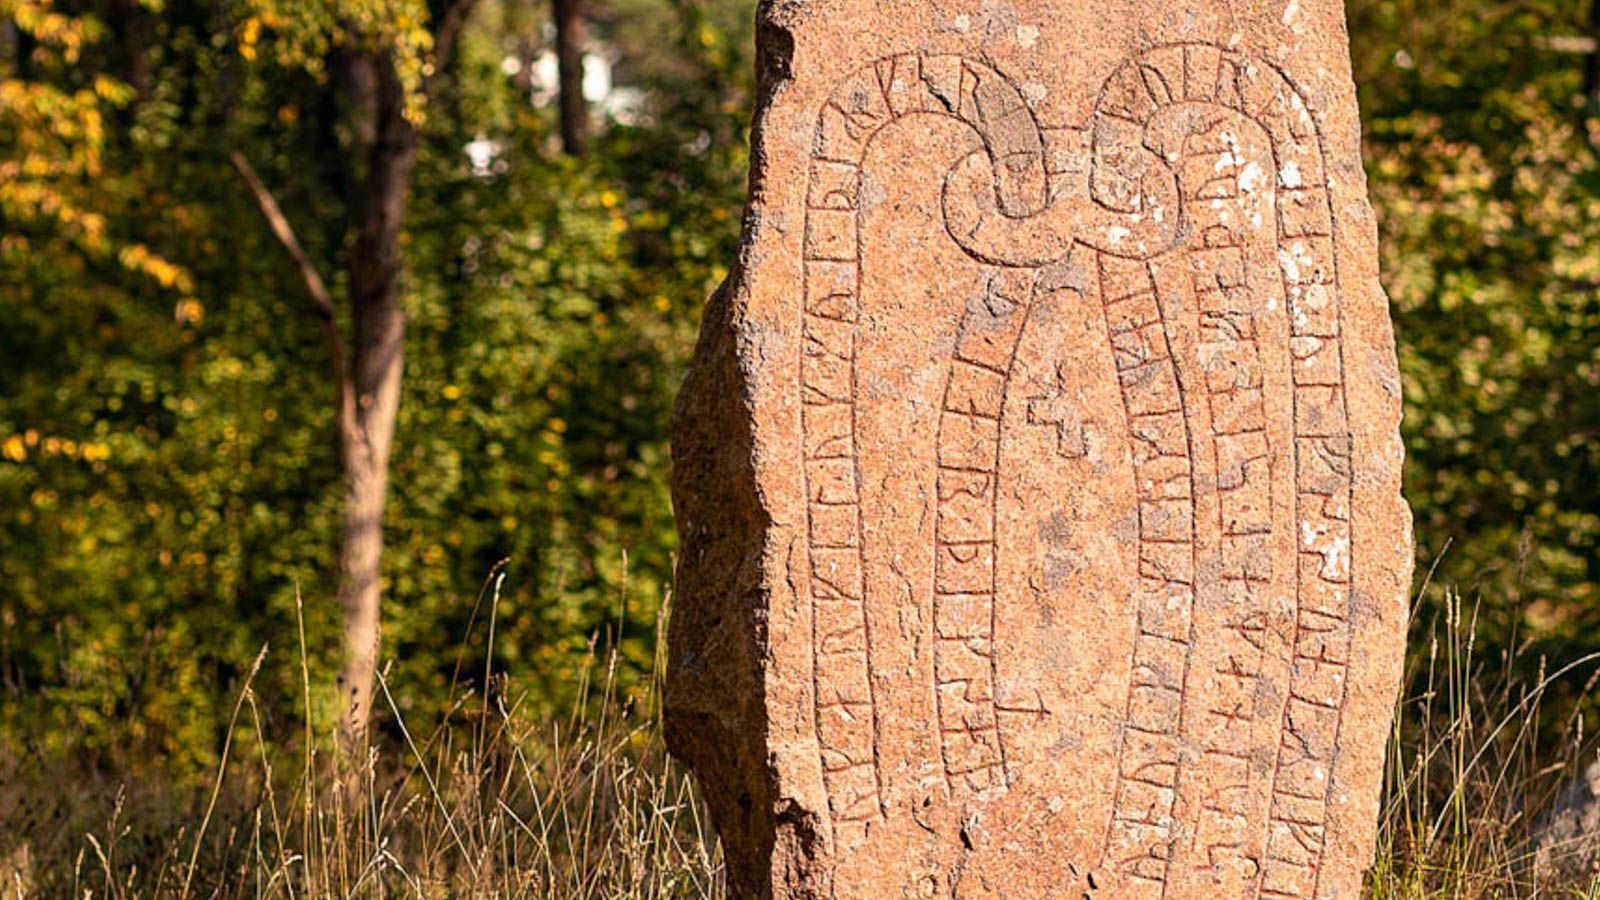 Three rune stones an ancient oracle the Viking runes An ancient